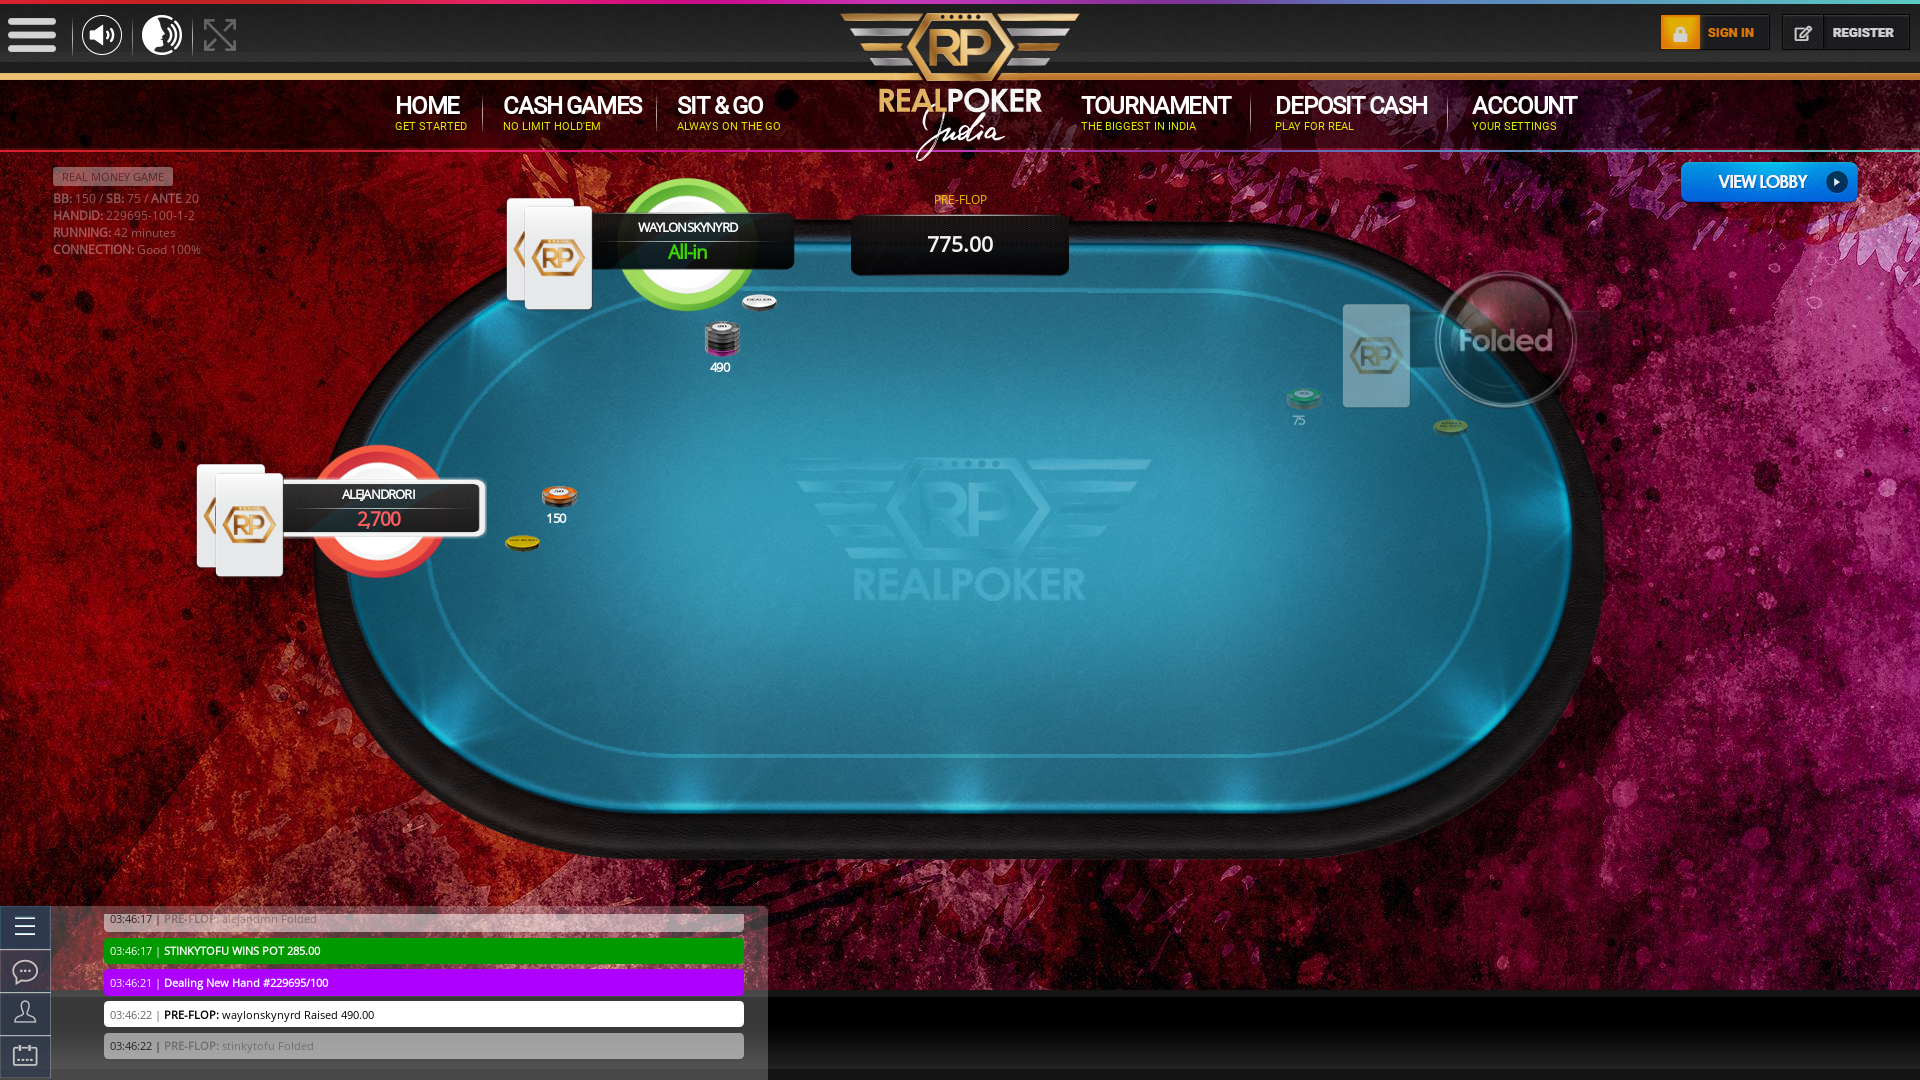 10 player texas holdem table at real poker with the table id 229695